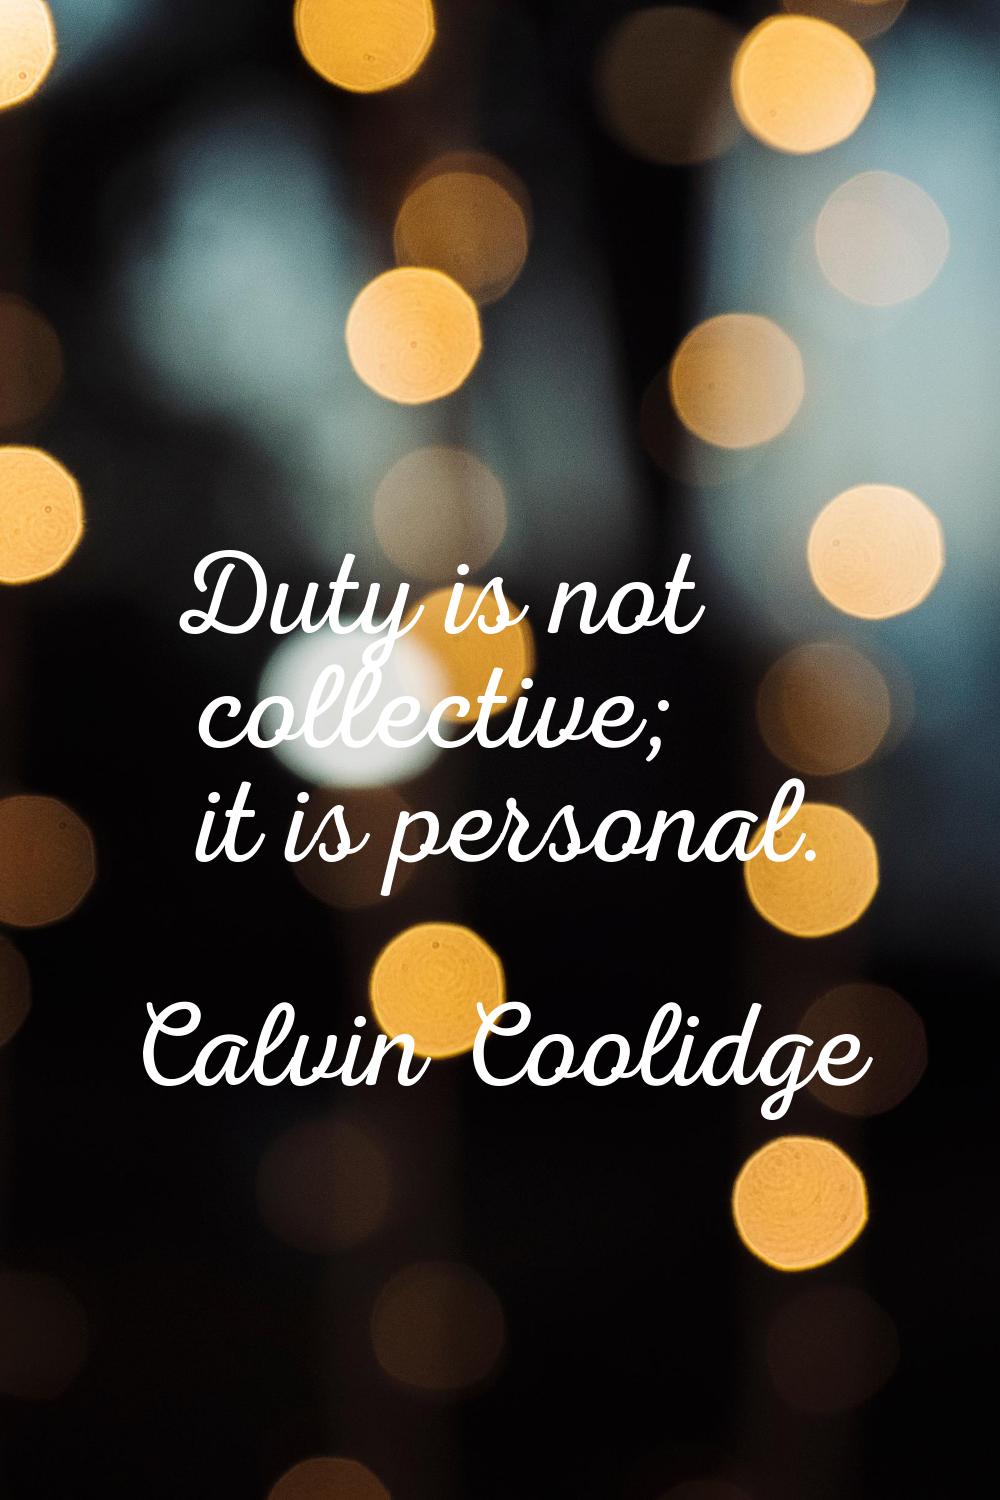 Duty is not collective; it is personal.